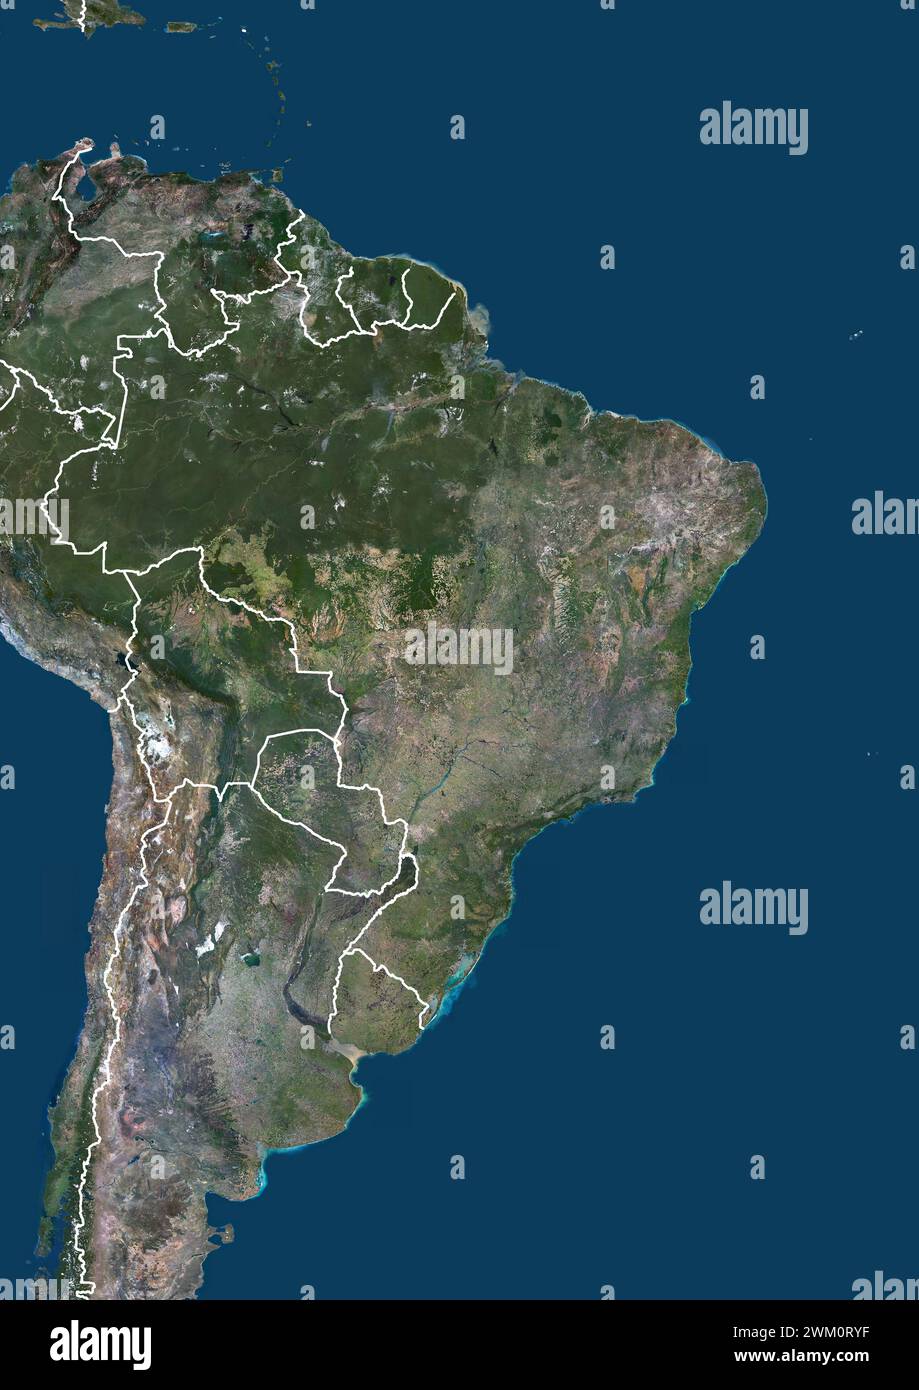 Color satellite image of Brazil and neighbouring countries (French Guyana, Suriname, Guyana, Venezuela, Bolivia, Paraguay, Uruguay), with borders. Stock Photo